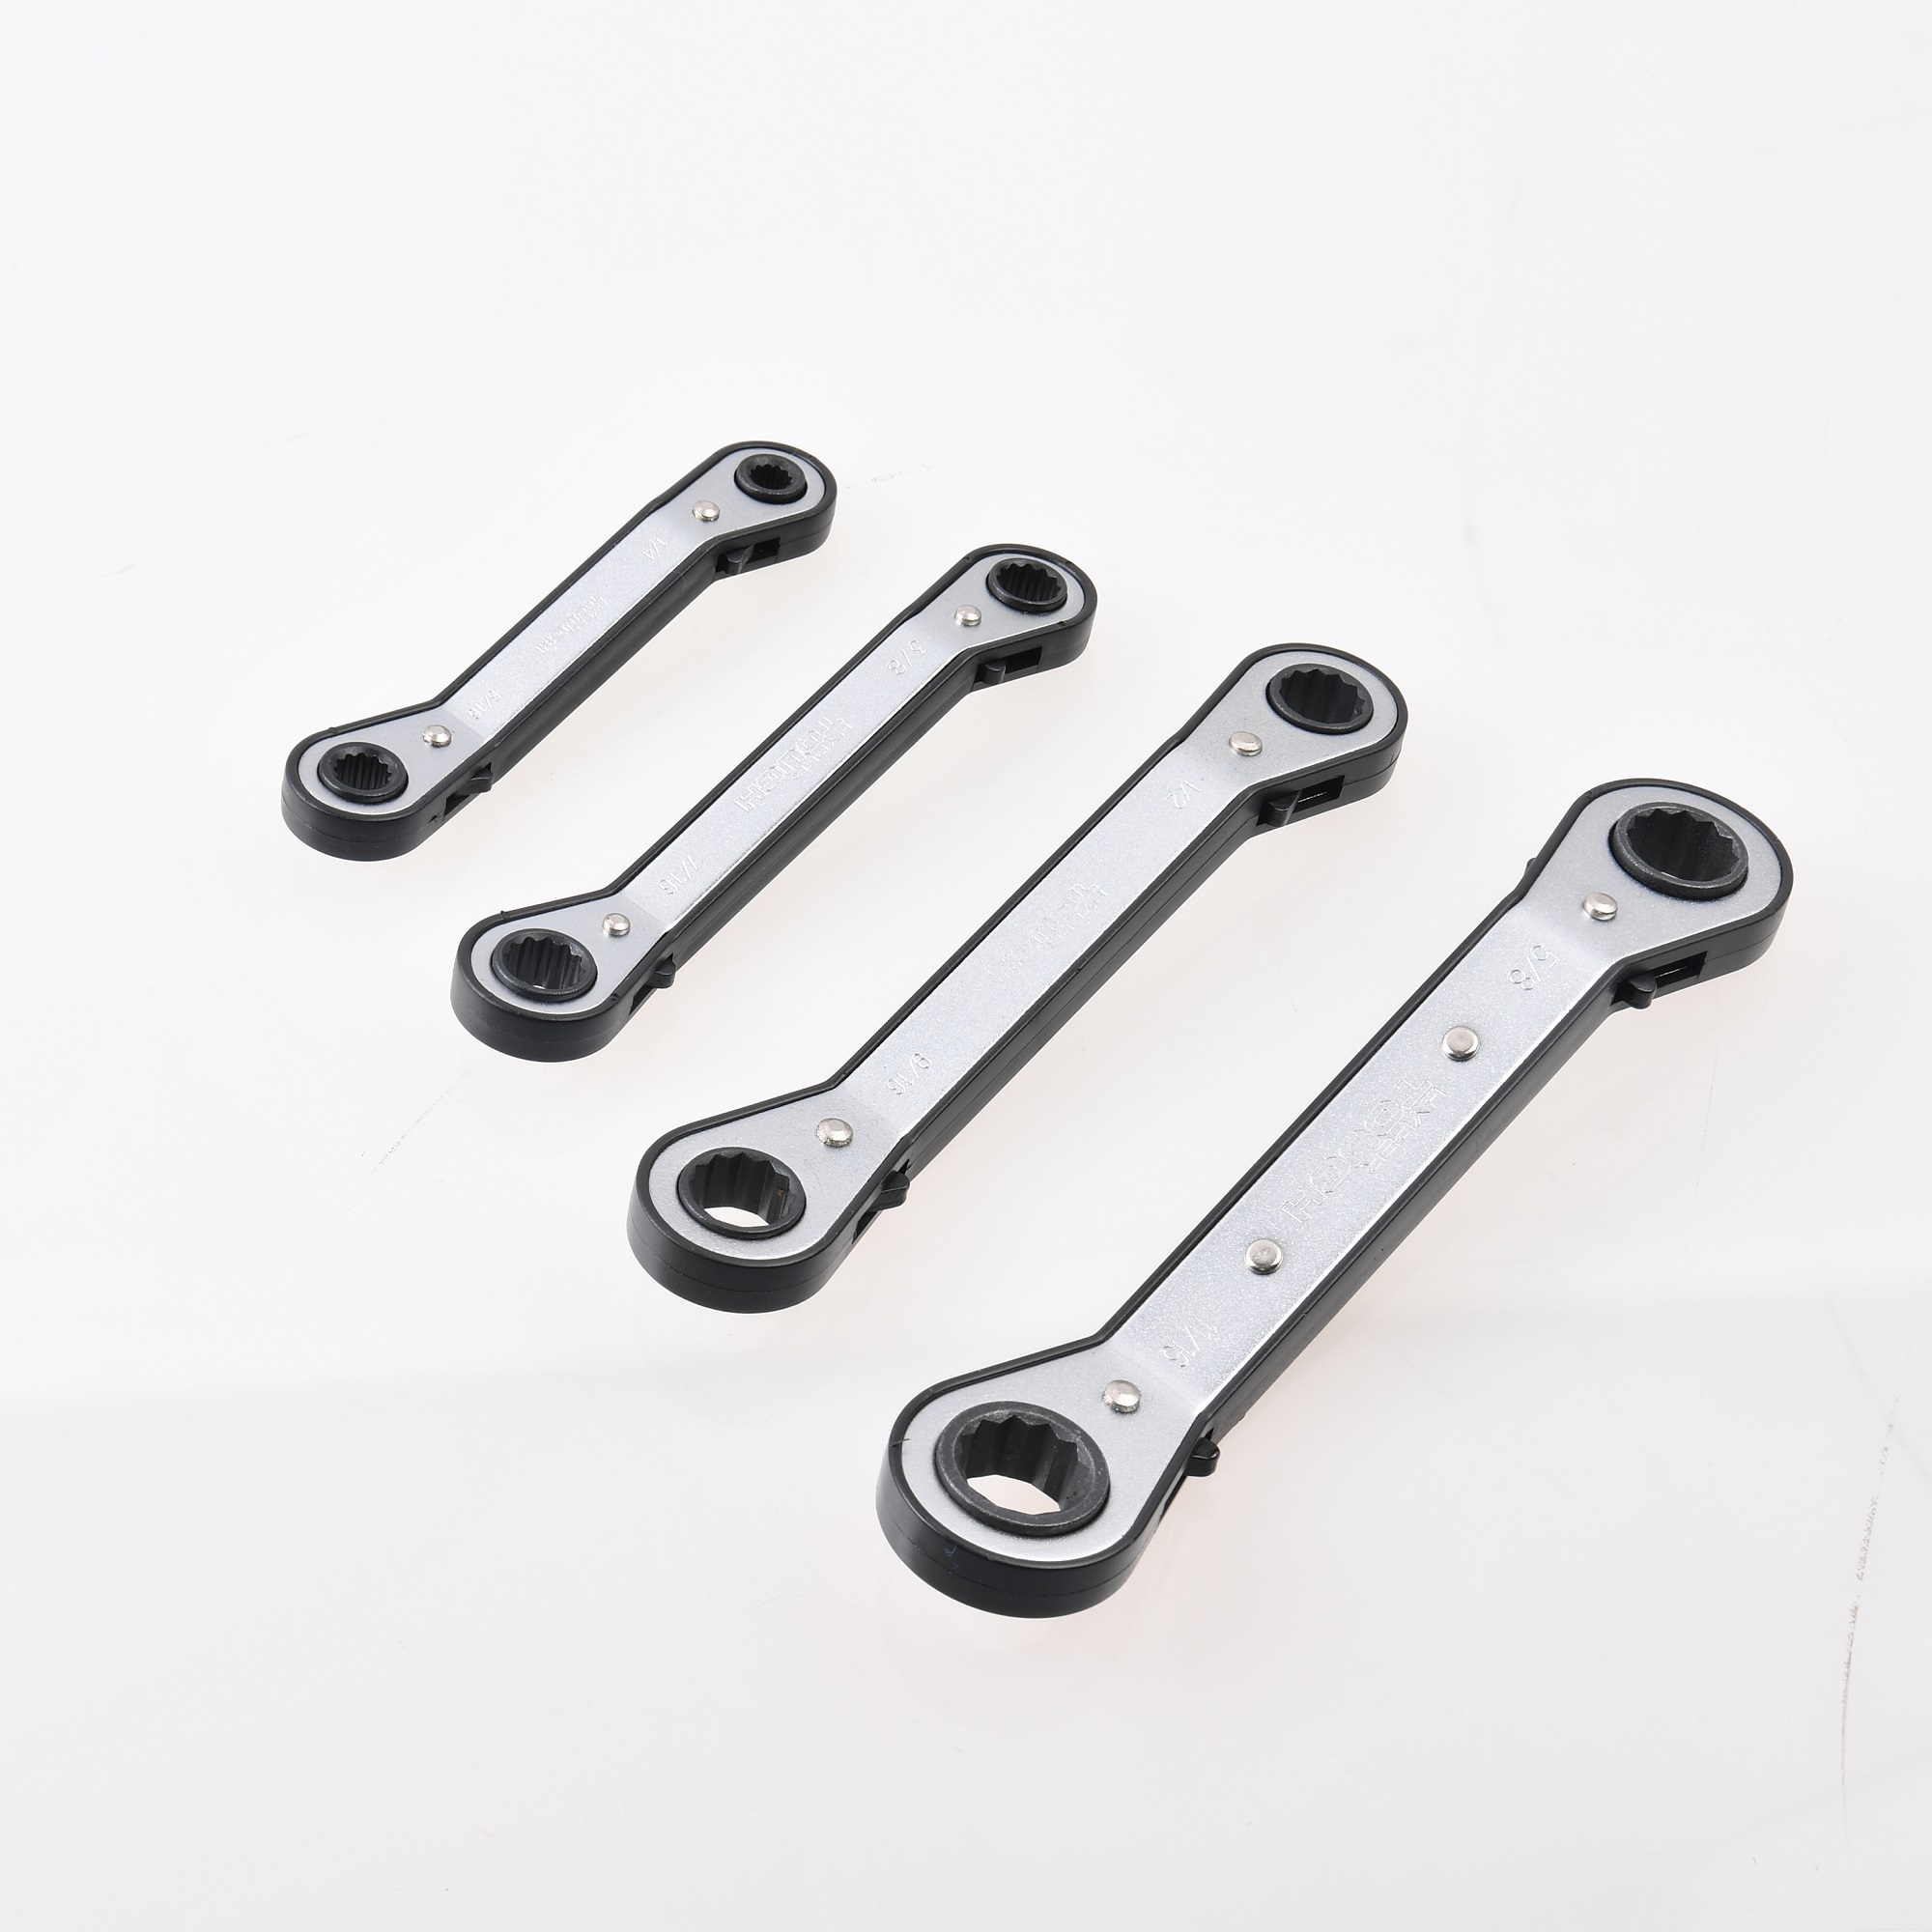 Hyper Tough Heavy-Duty 4-Piece SAE Ratchet Wrench Set - image 2 of 9